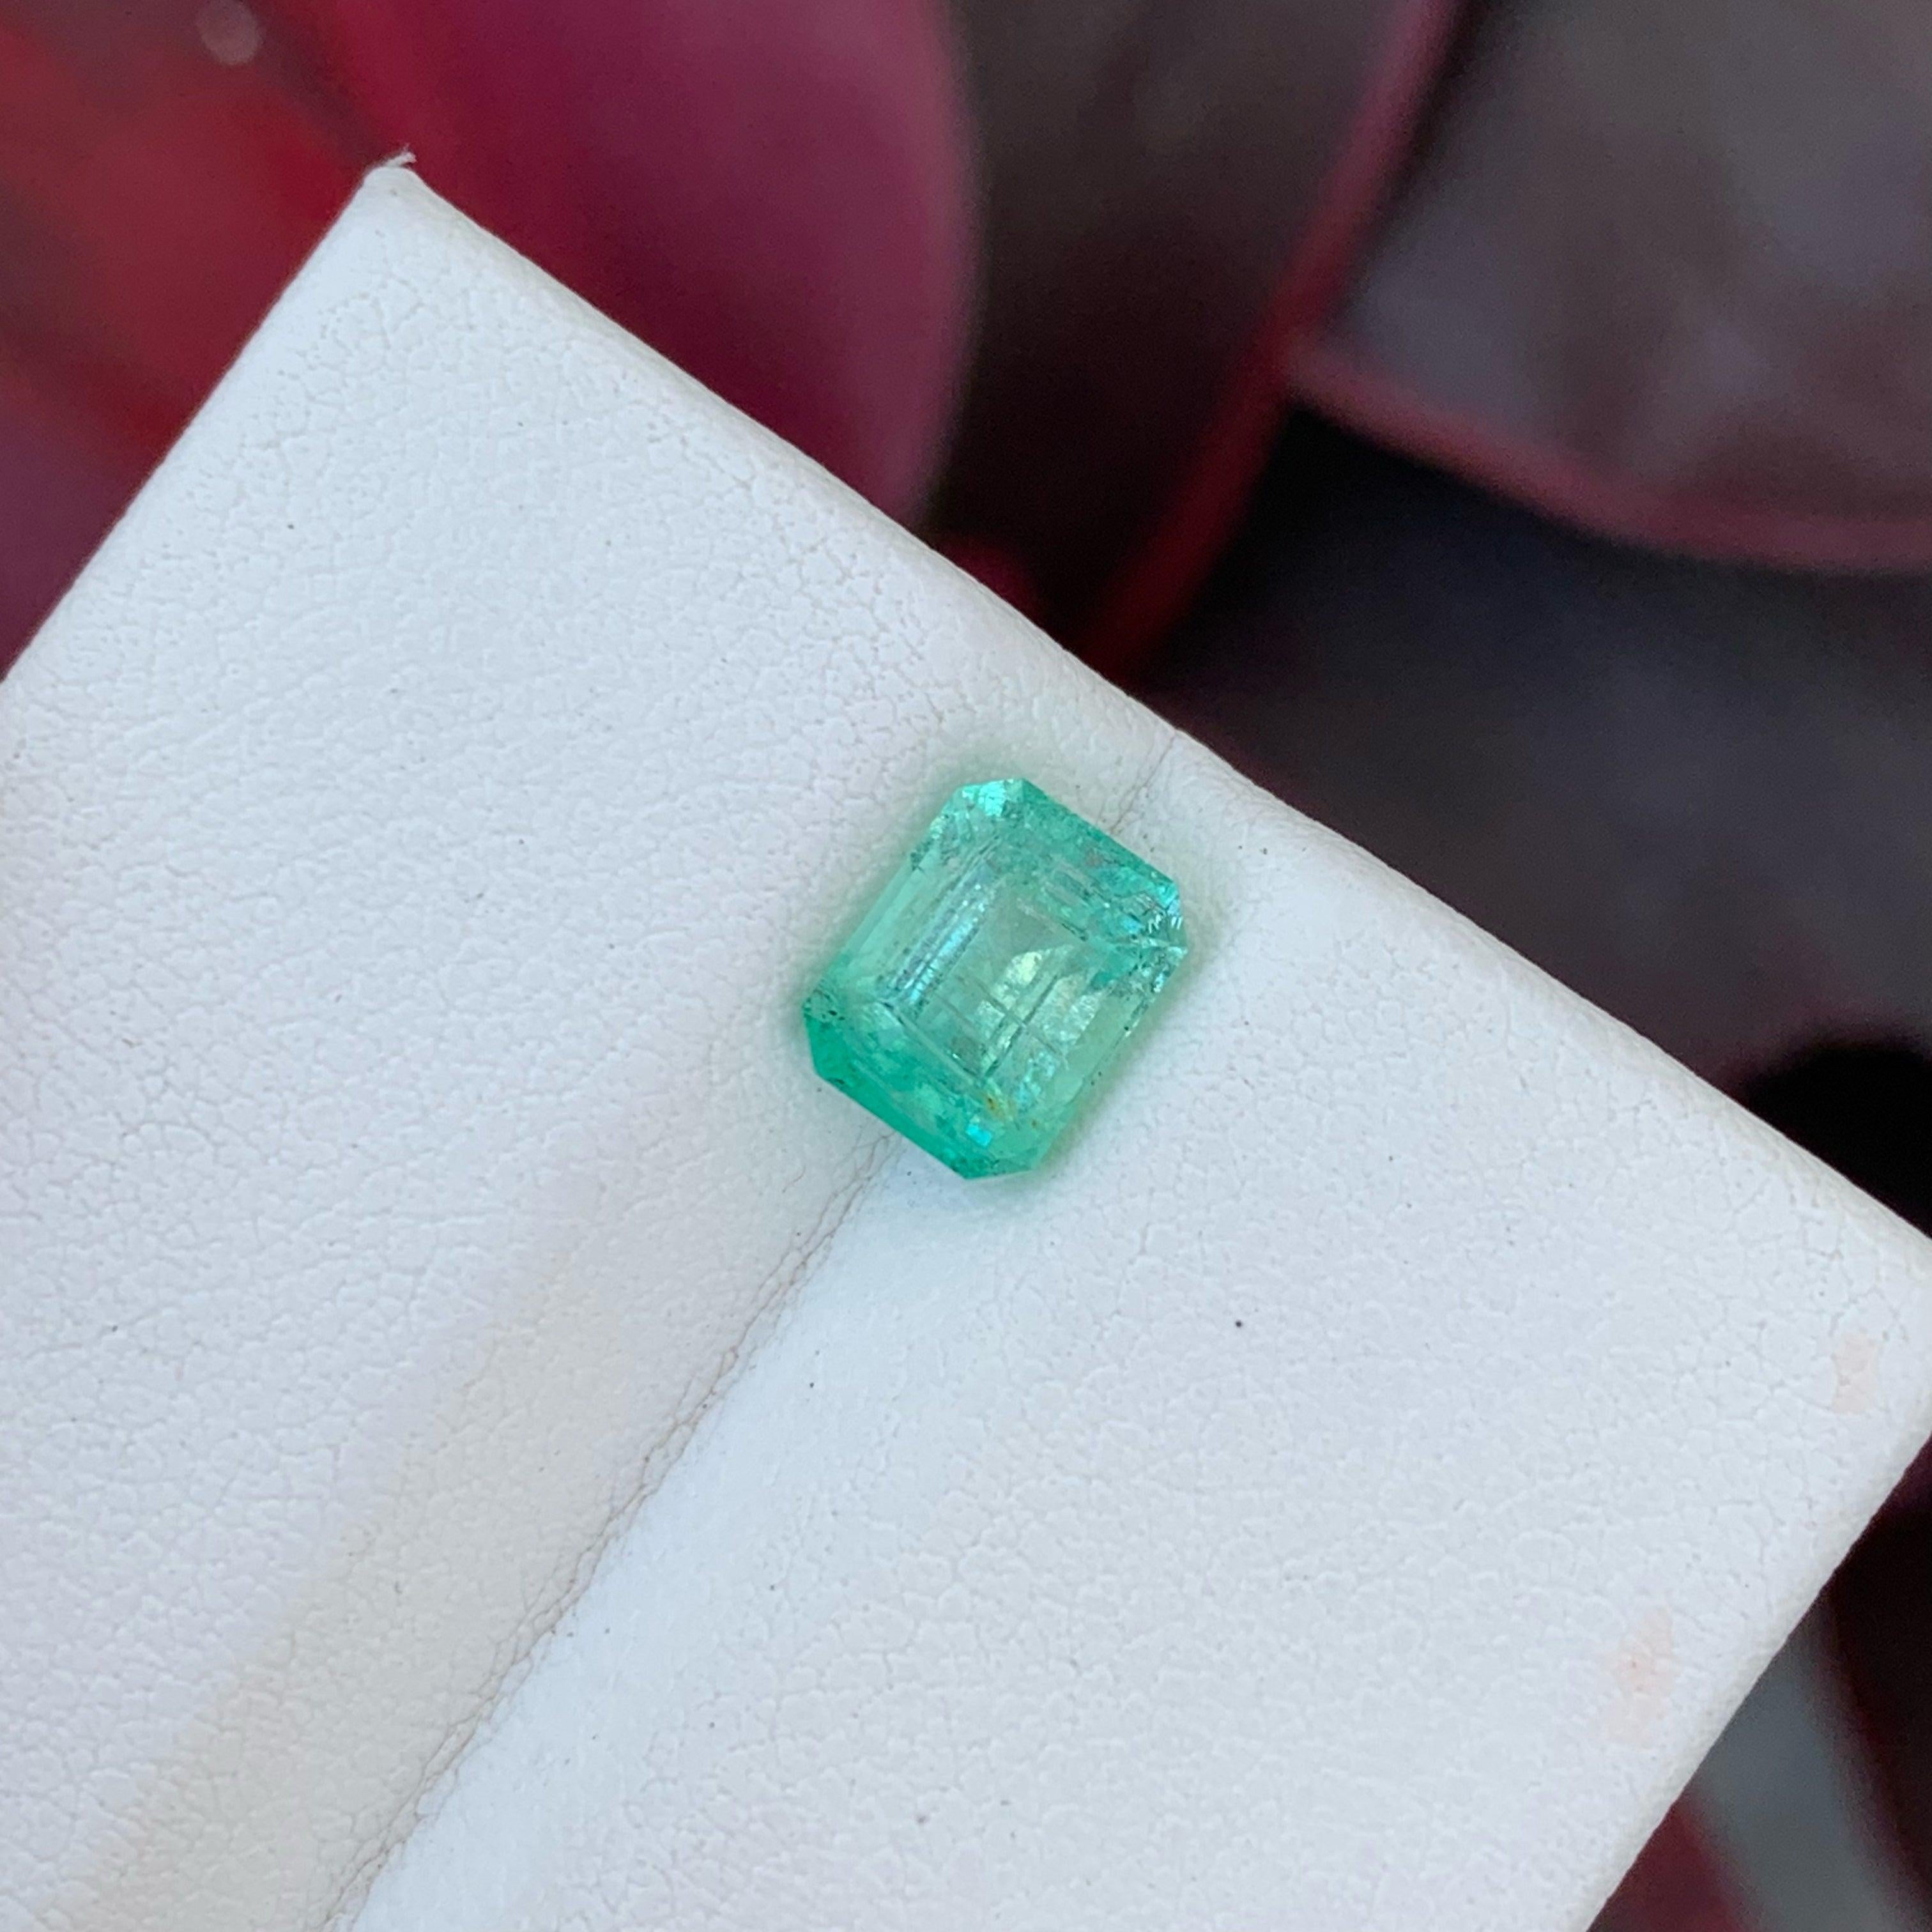 Natural Pastel Green Emerald Gemstone, Available For Sale At wholesale Price Natural High Quality, 1.70 Carats Loose Emerald From Afghanistan.

Product Information:
GEMSTONE TYPE: Natural Pastel Green Emerald Gemstone
WEIGHT: 1.70 Carats
DIMENSIONS: